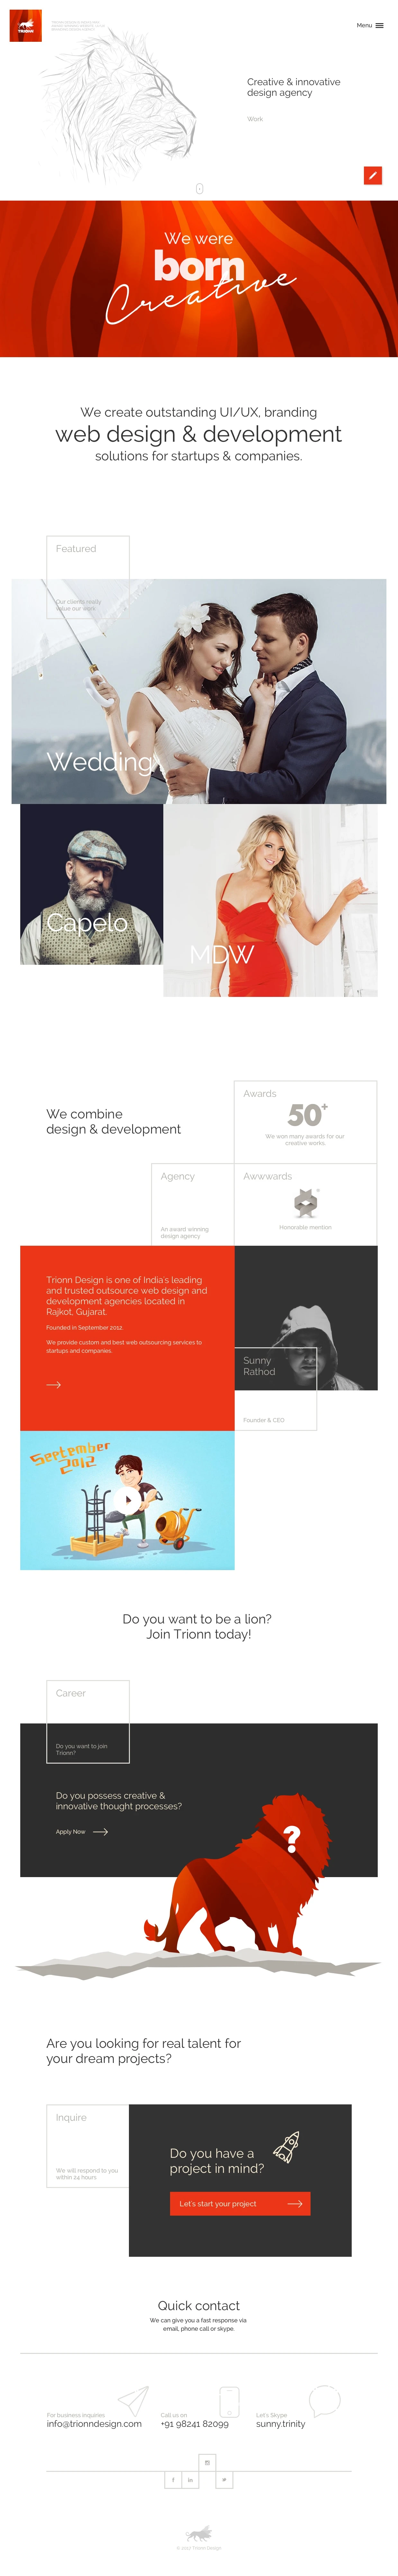 Trionn Design Landing Page Example: An Award Winning Design and Development Agency in India